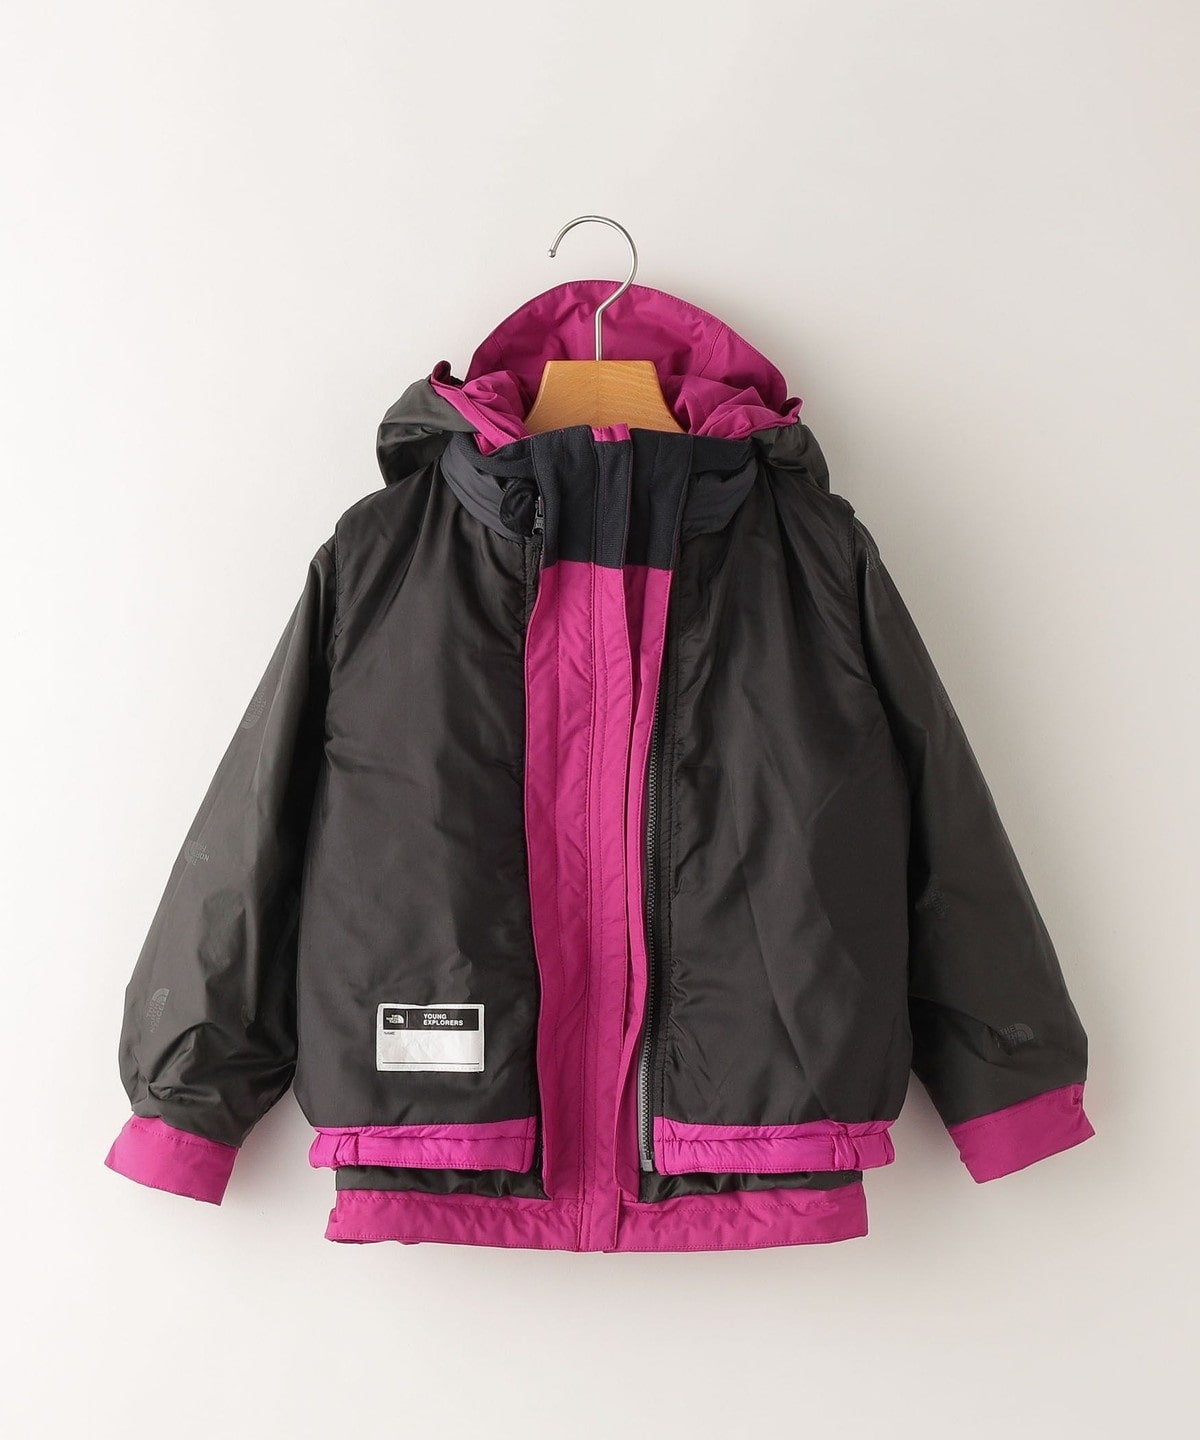 THE NORTH FACE:100～150cm / Snow Triclimate Jacket: アウター